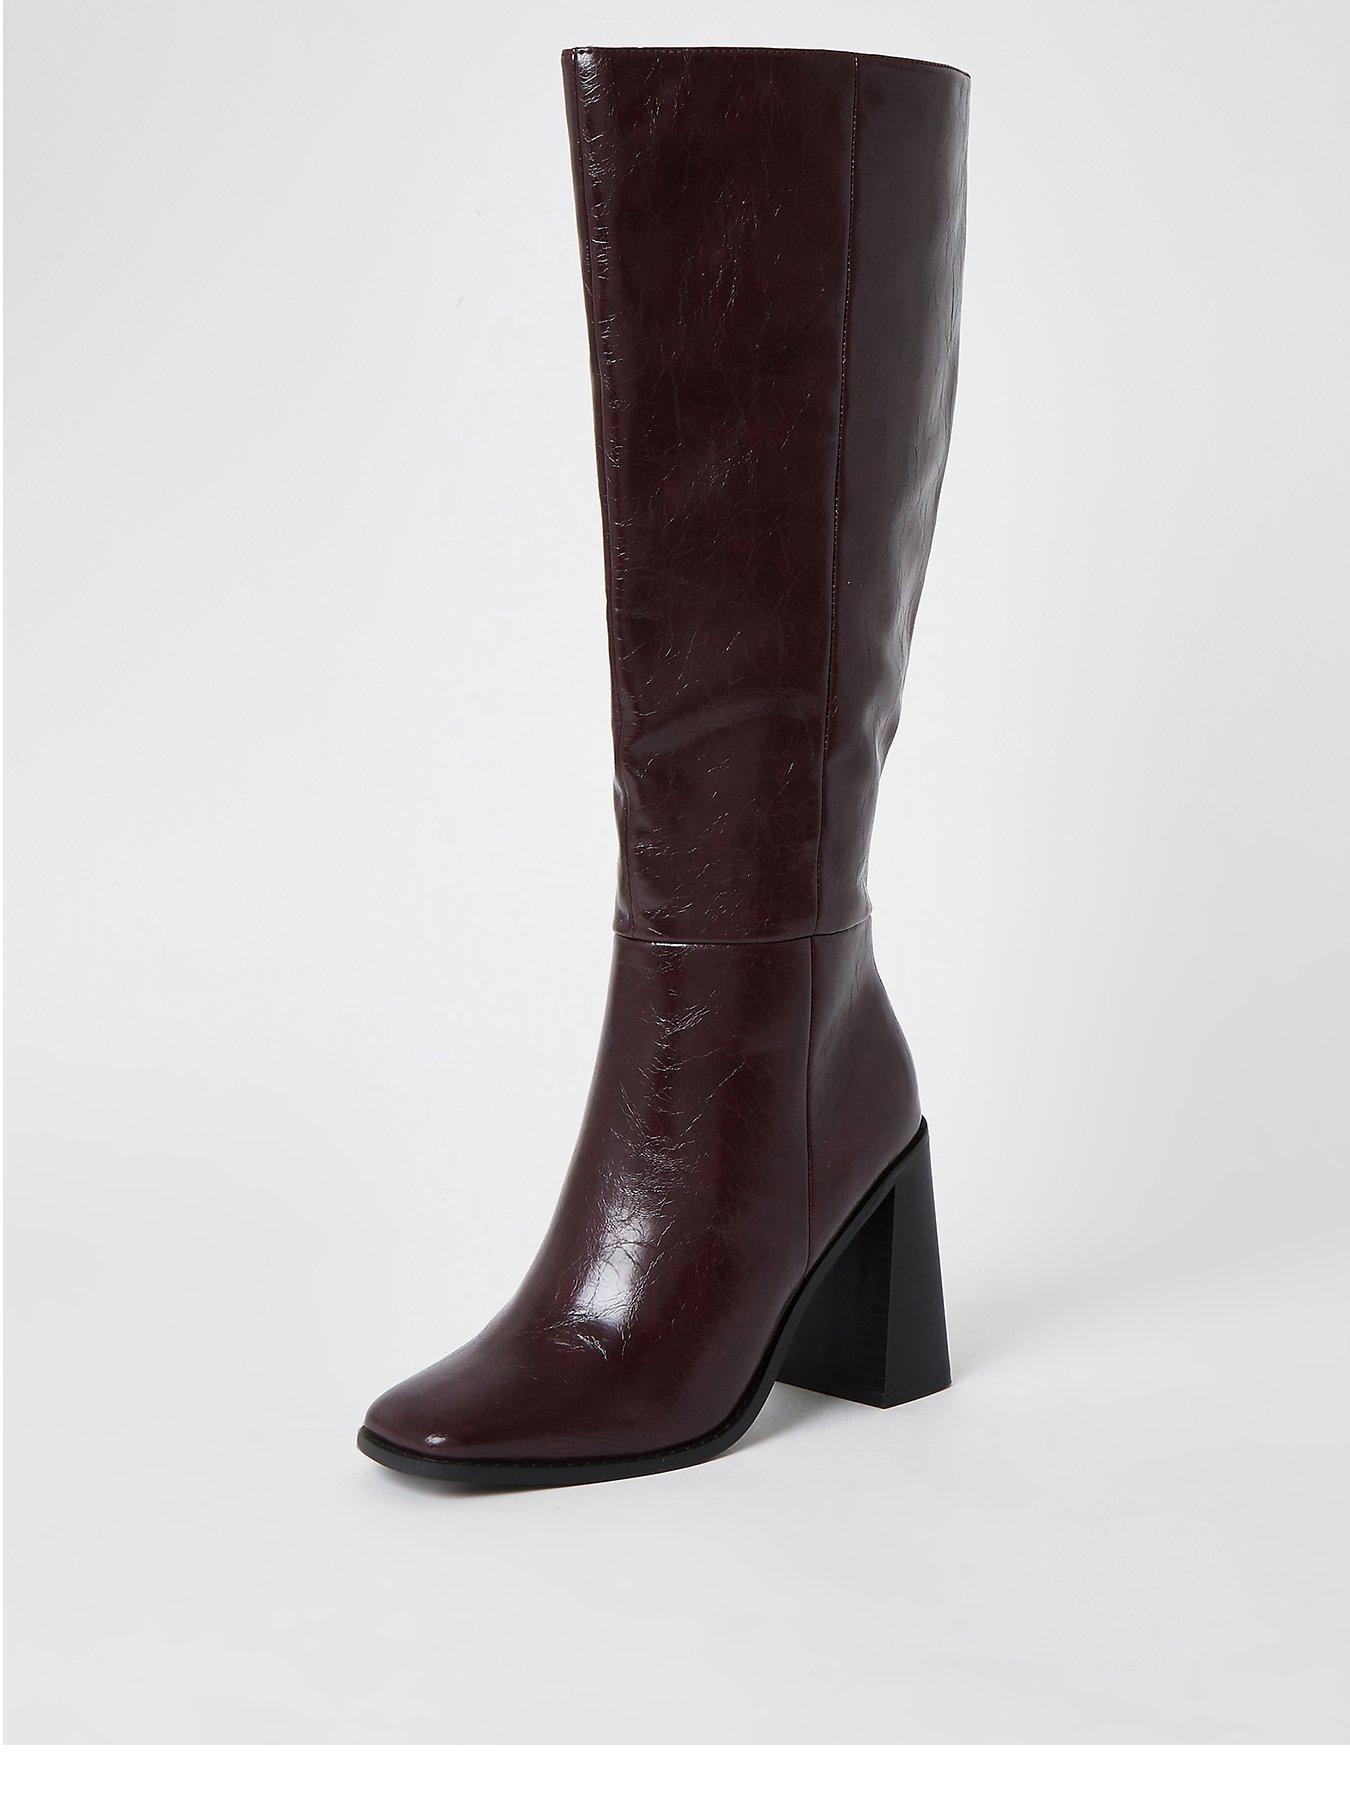 Knee High Boots | River island | Shoes 